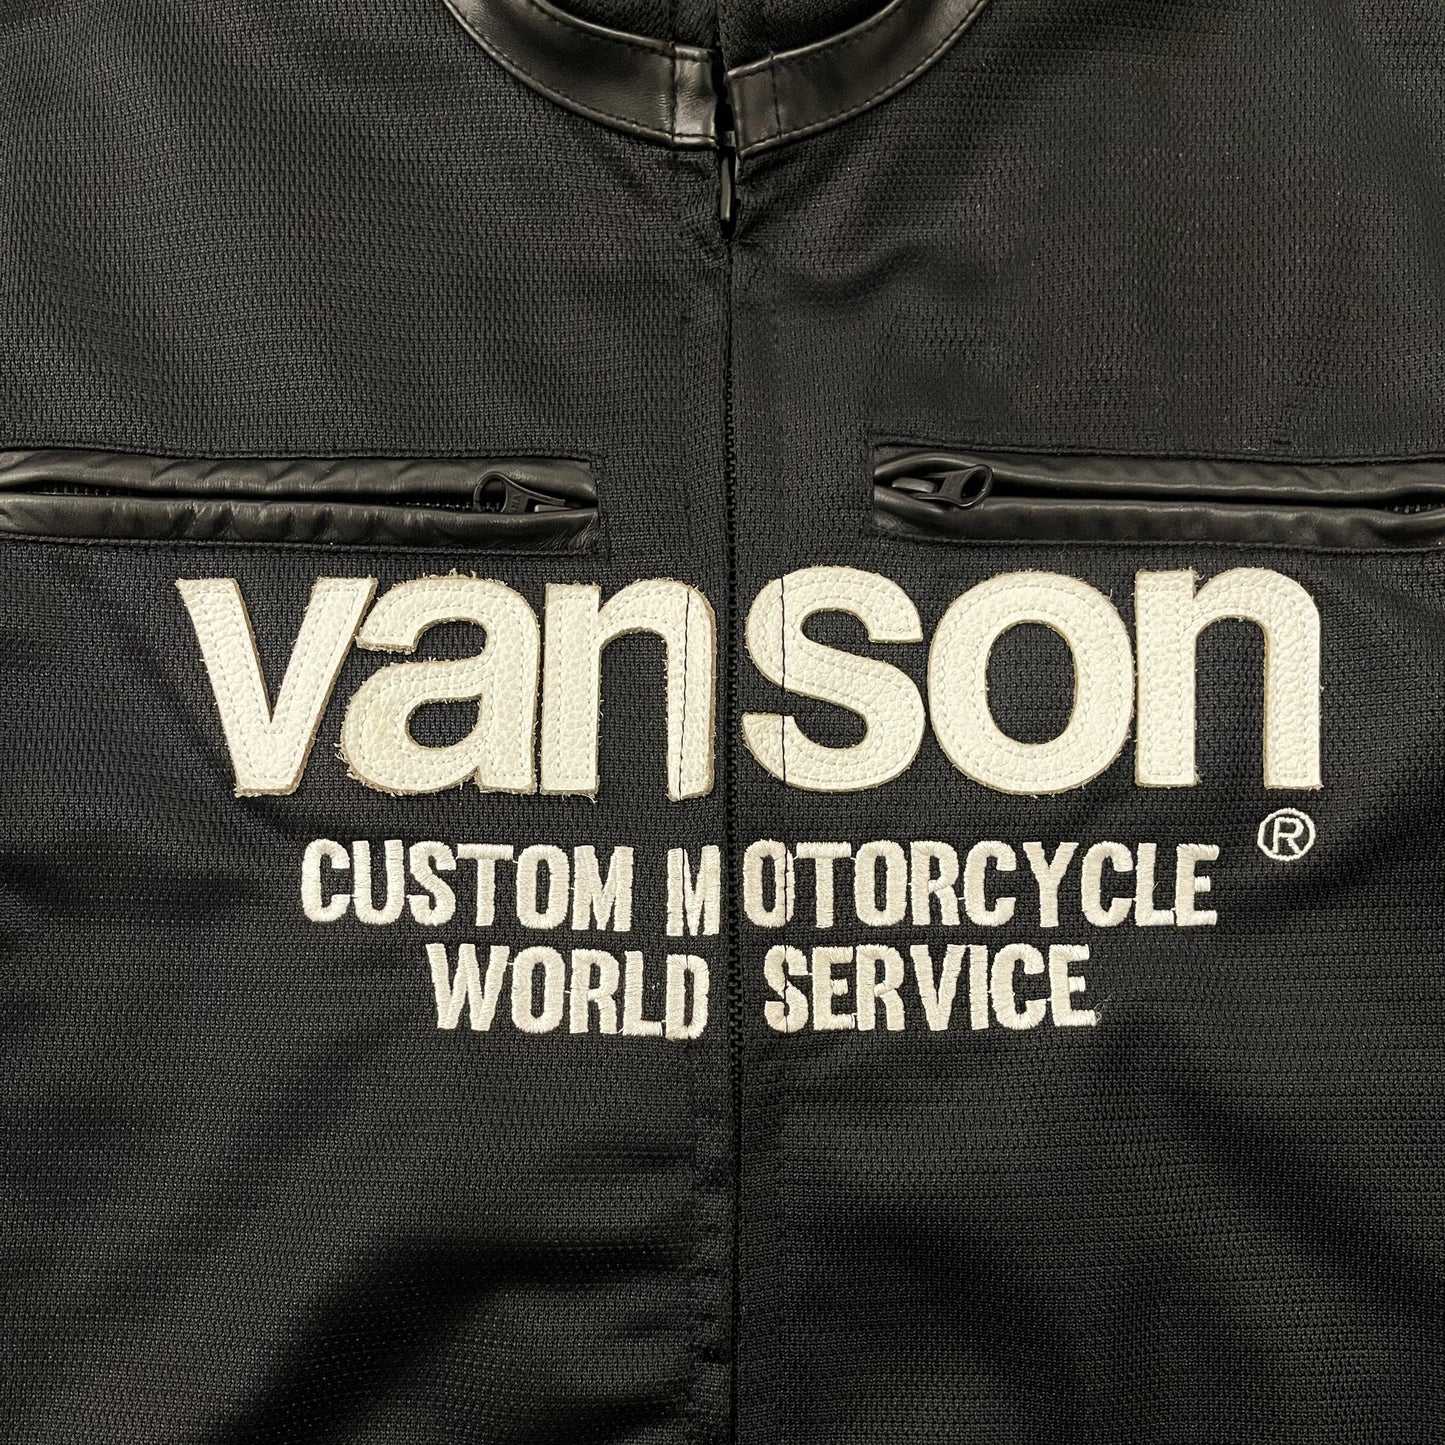 Vanson Leathers Motorcycle Mesh Racer Jacket - Known Source